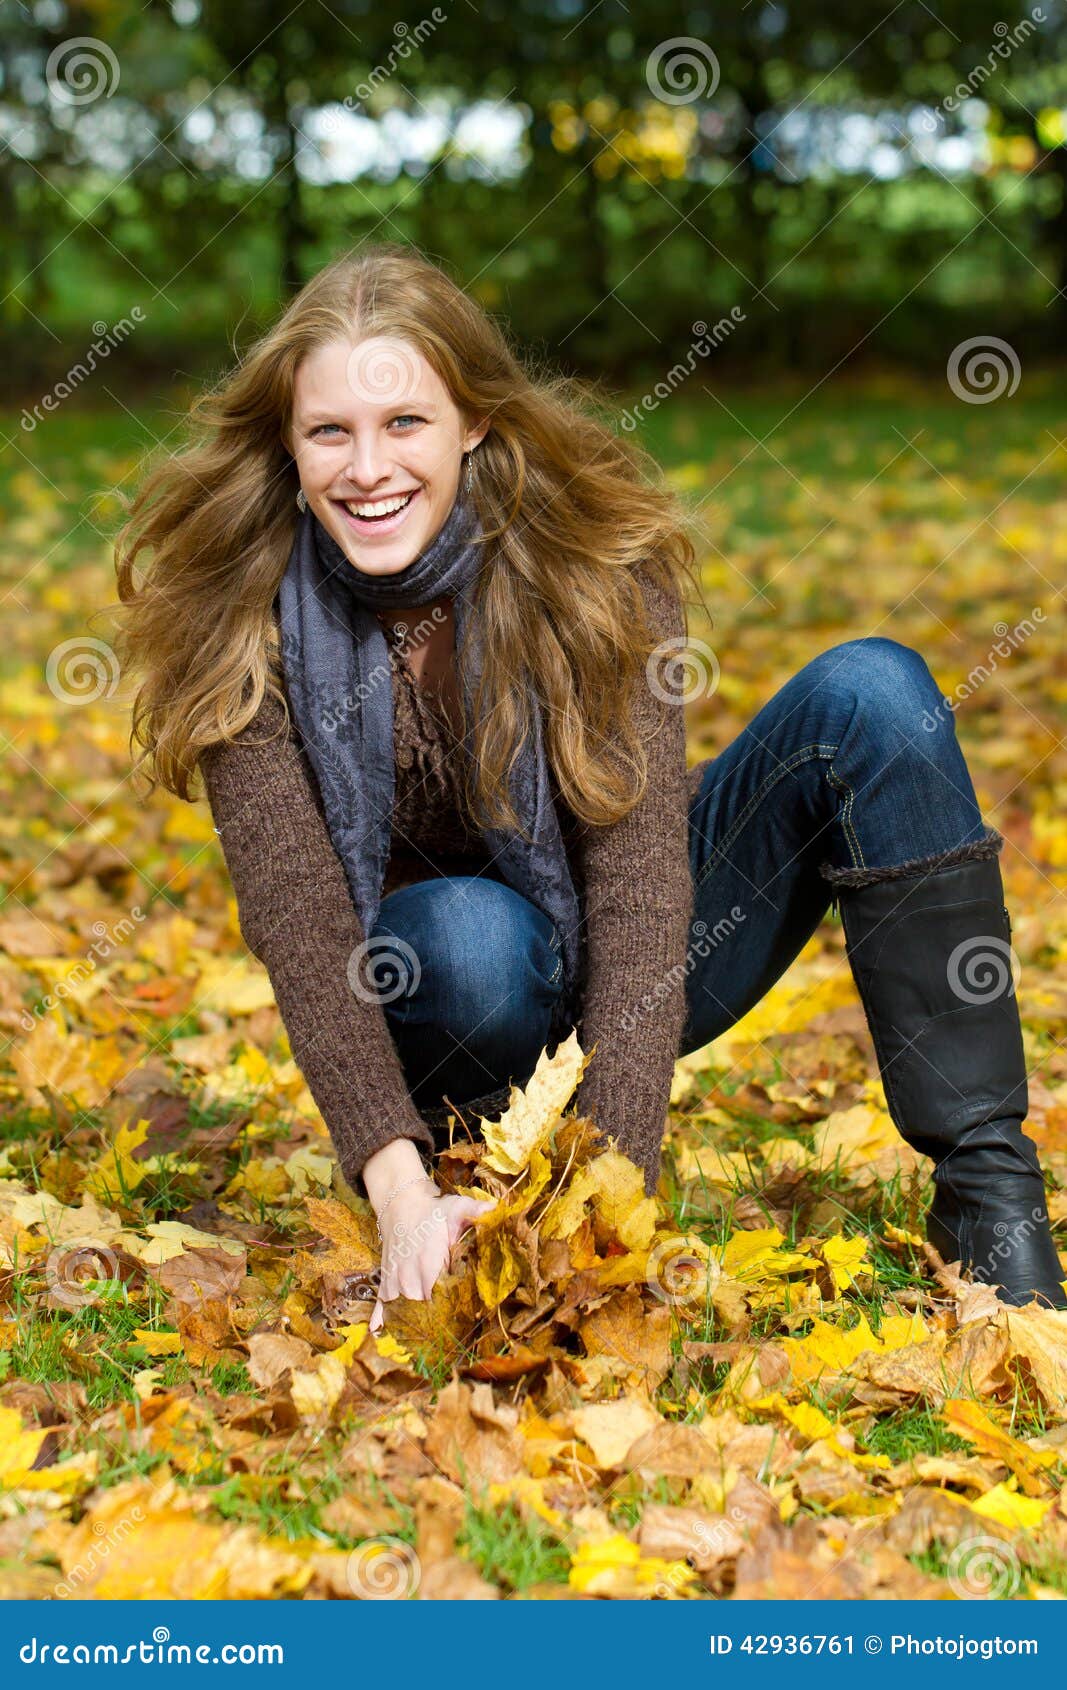 Young Woman Having Fun in Autumn Stock Image - Image of fall, eyes ...